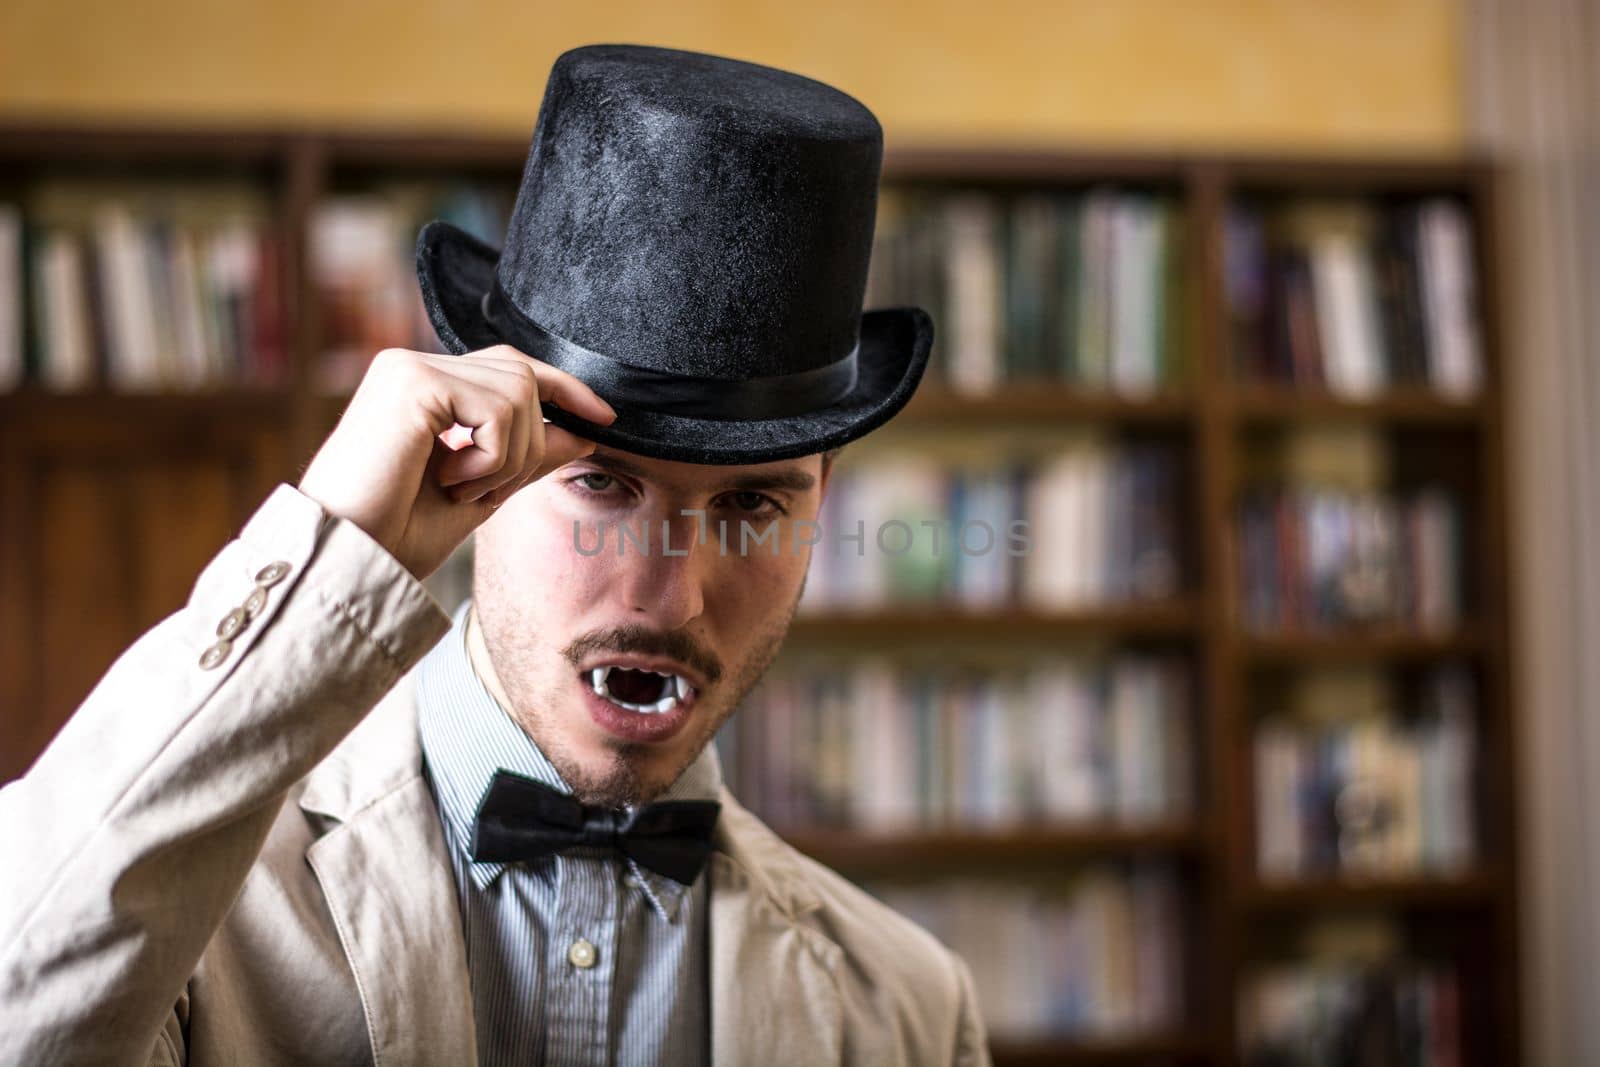 Portrait of a Young Vampire Man with High Hat Looking at the Camera, At Home or in Library